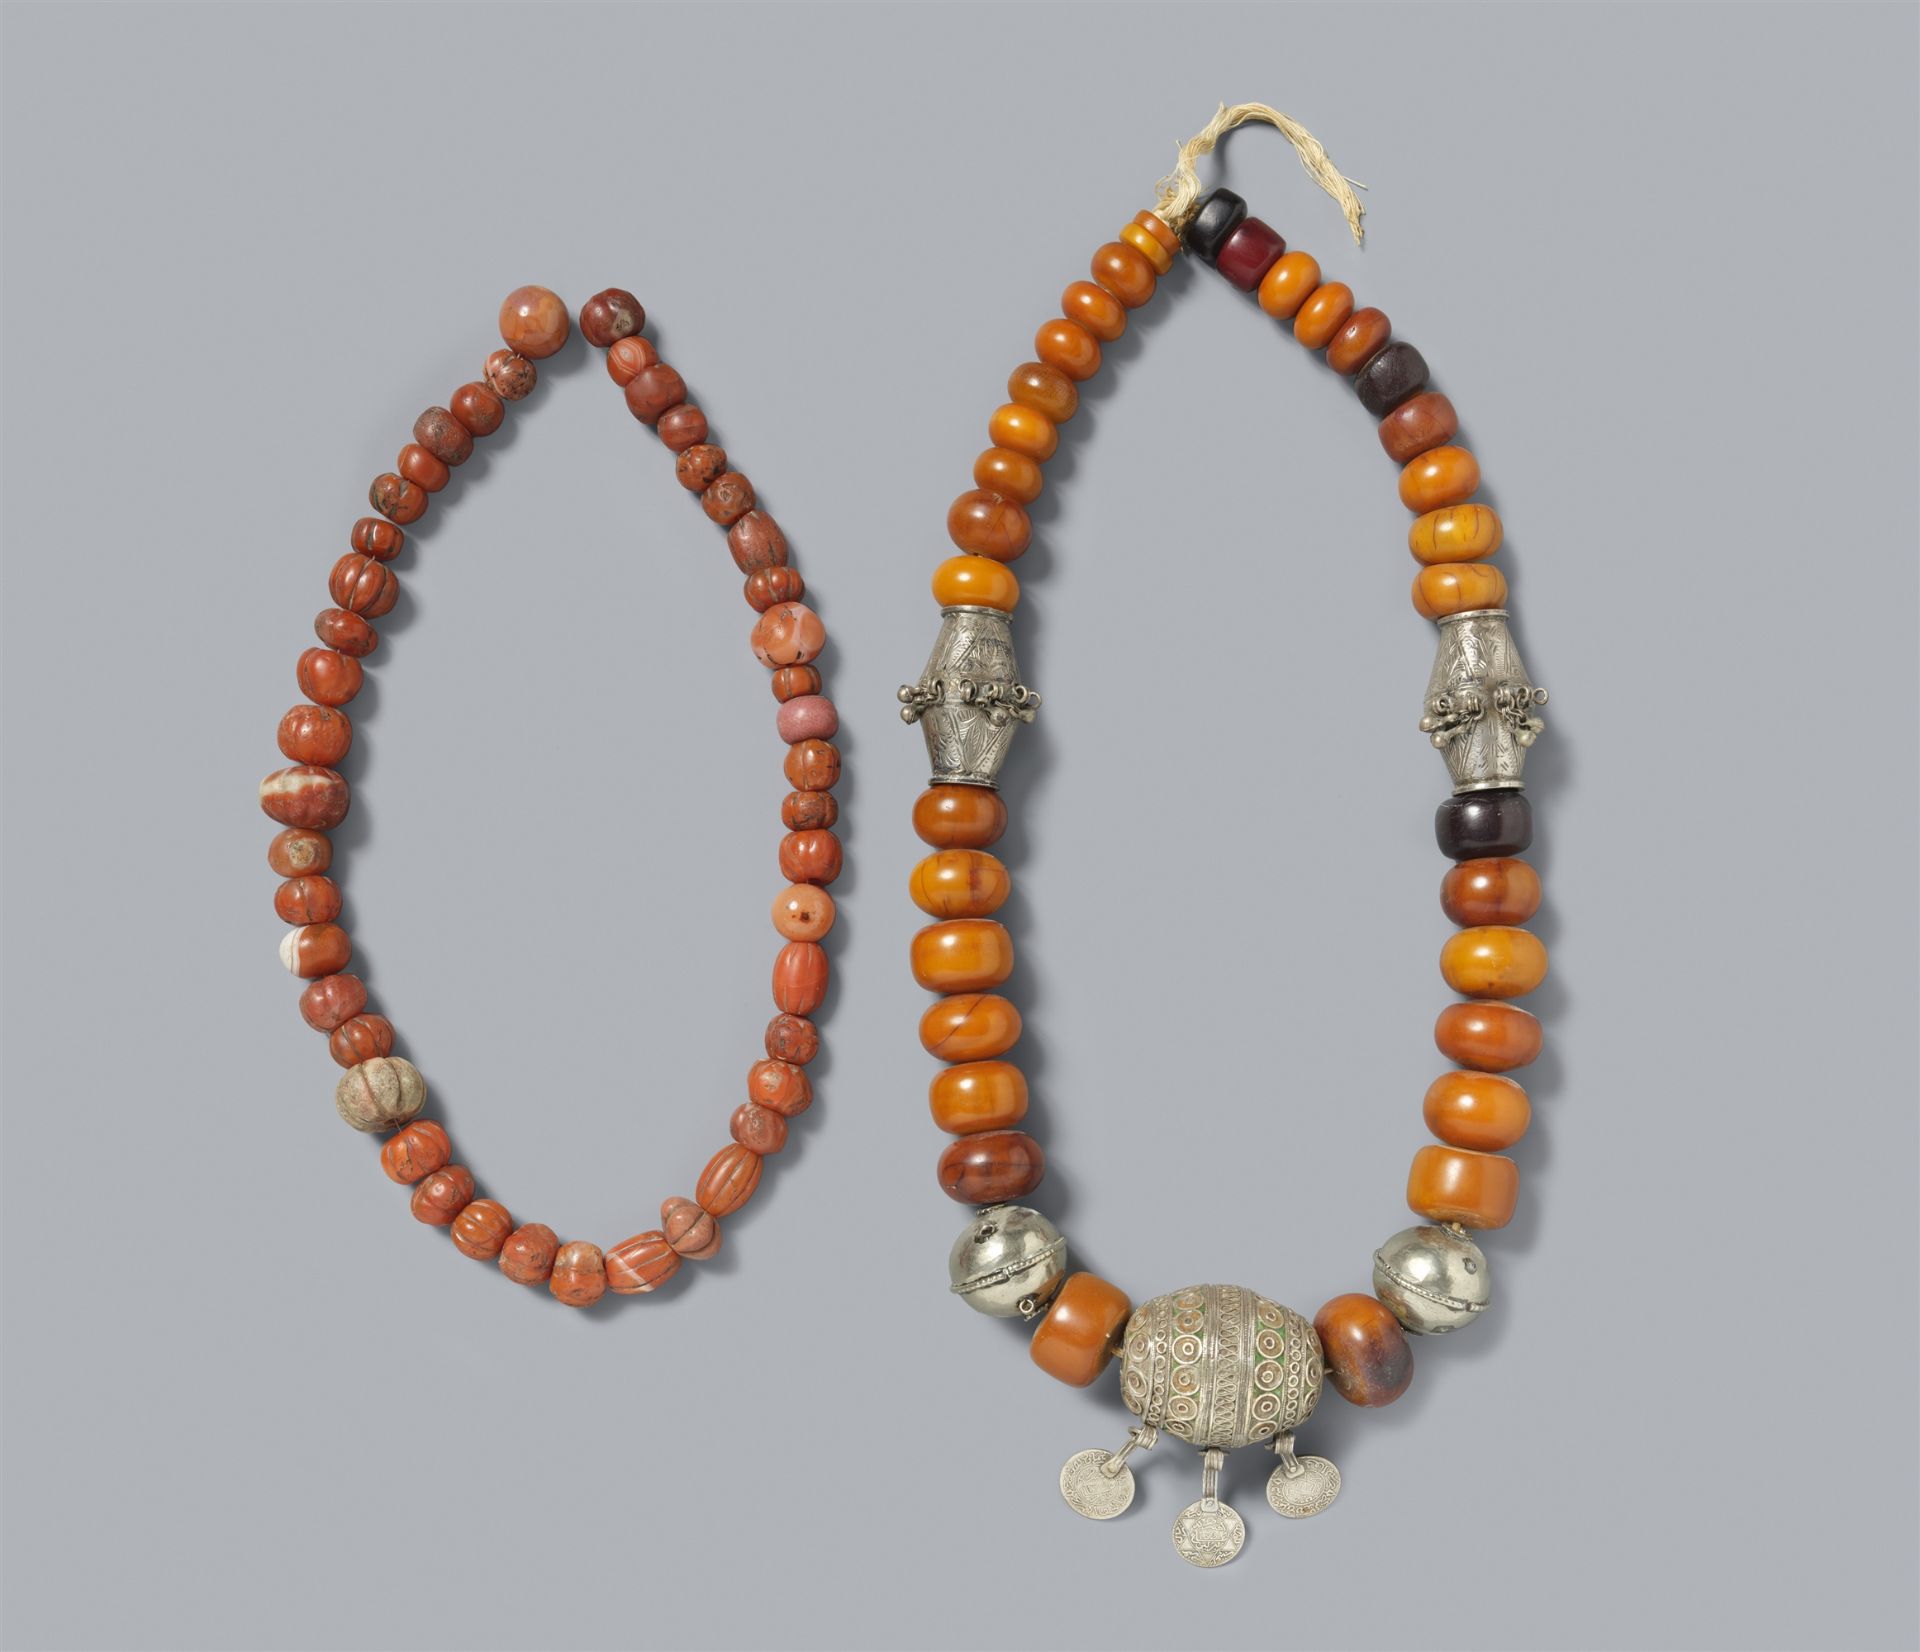 Two Tibetan amber and other resins, silver, and coral beads necklaces